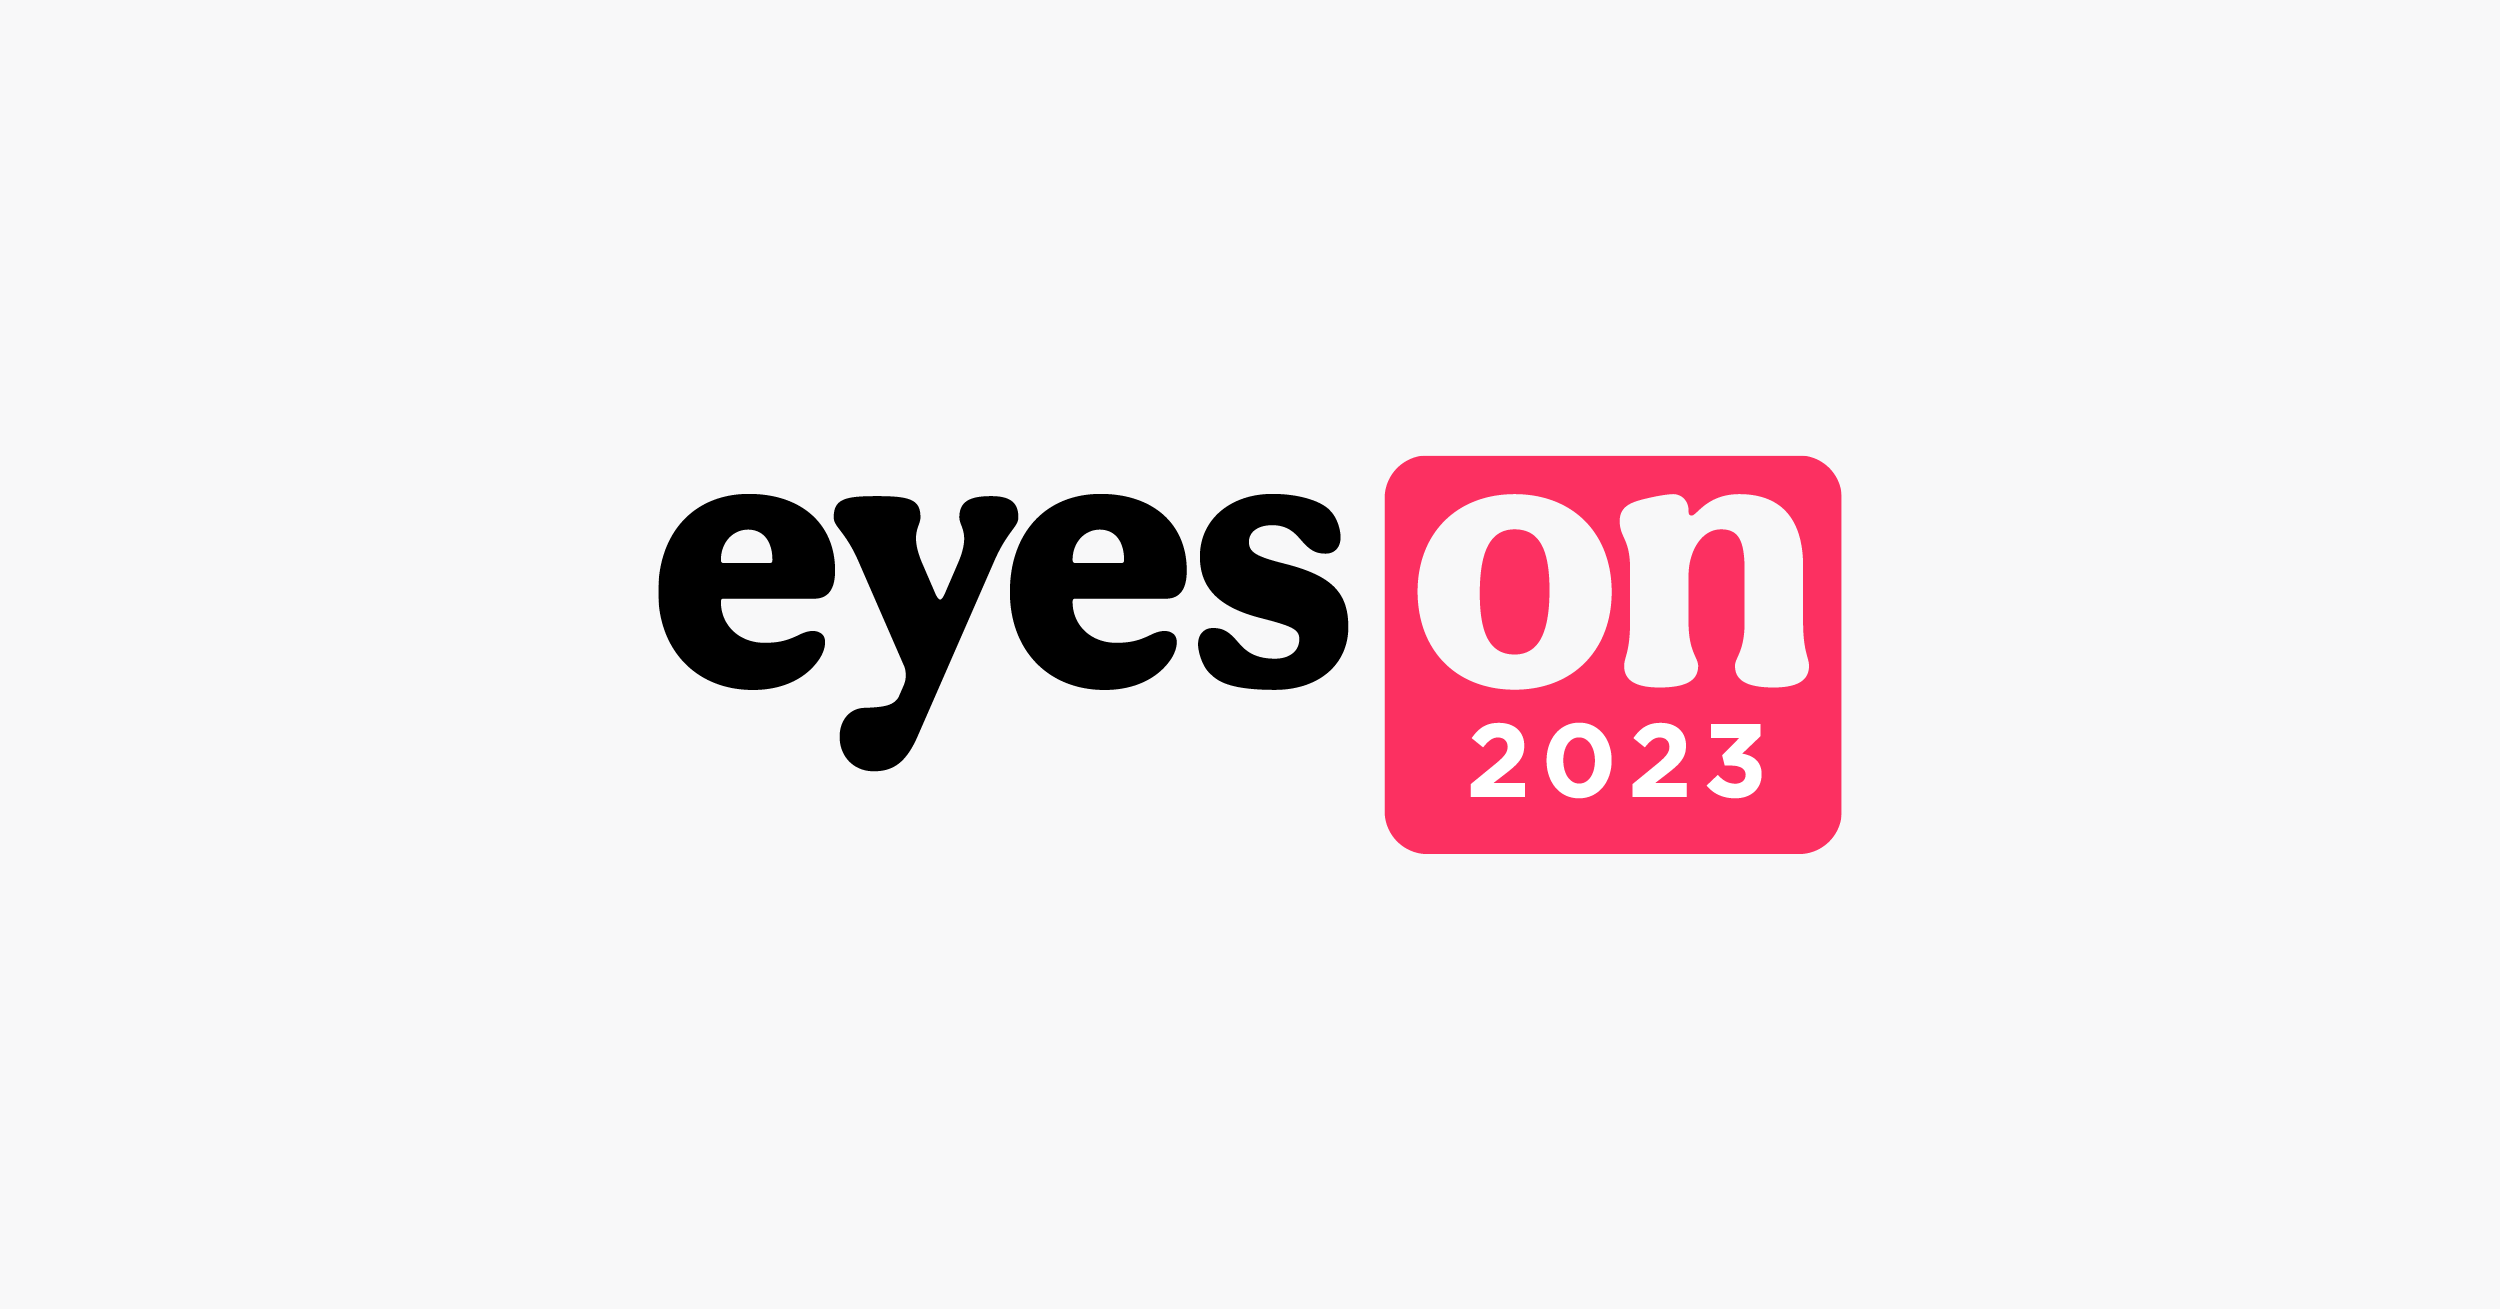 Eyes On 2023 Wraps Up as the Biggest Virtual Eyecare Event of 2022